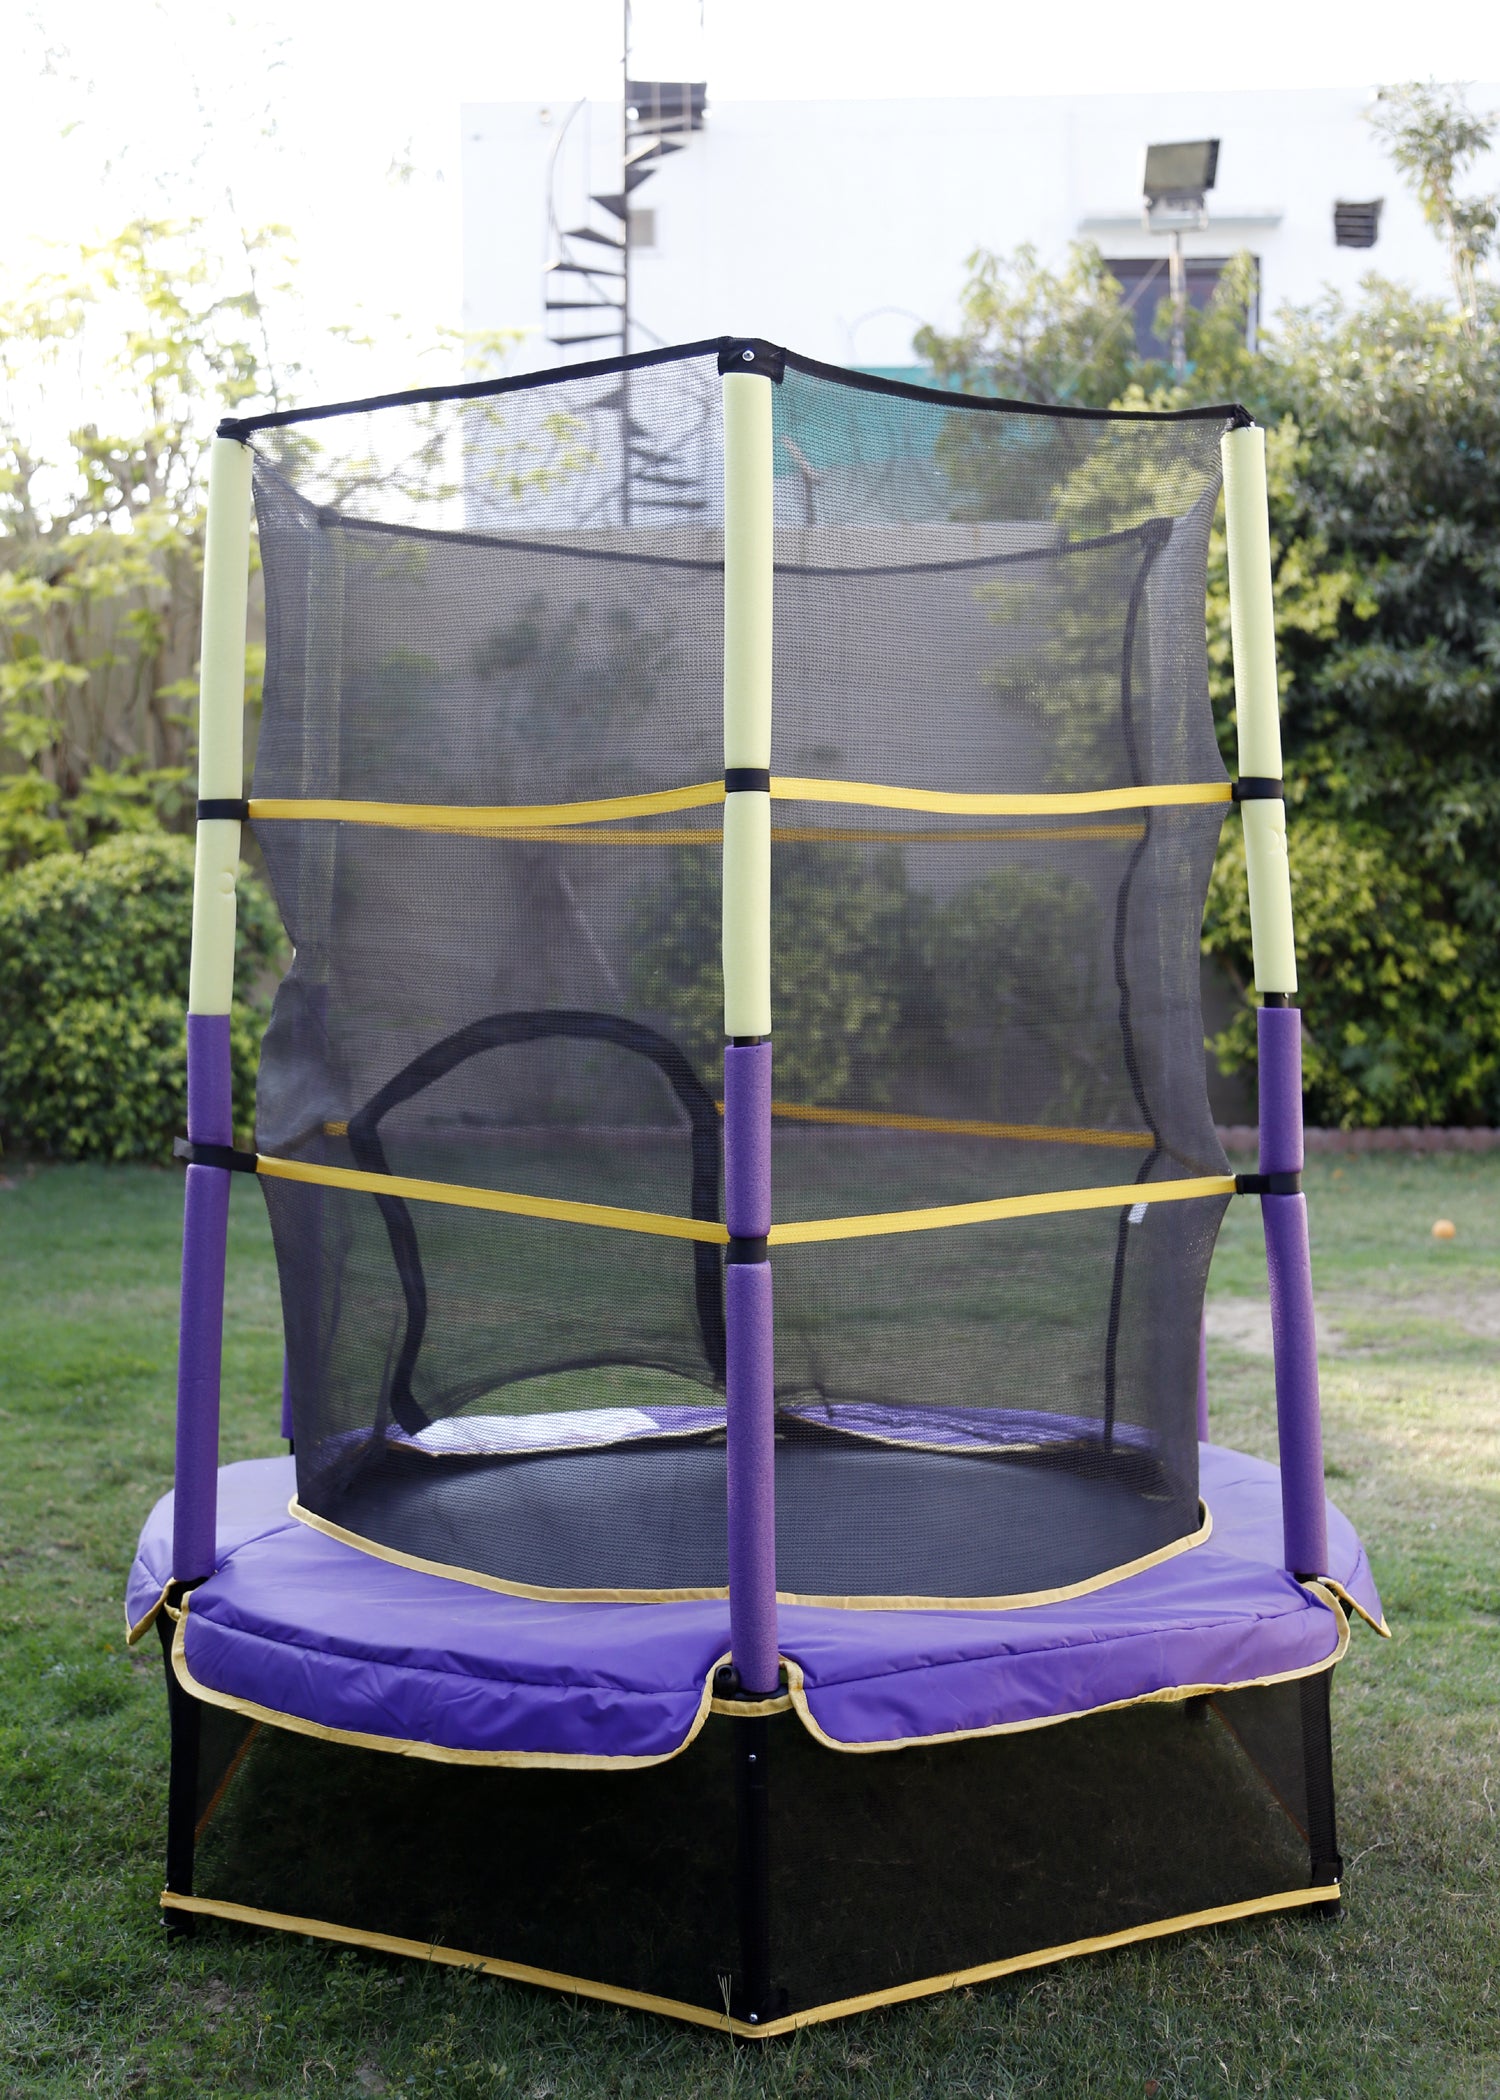 Kids Trampoline with Safety Net and Red Cover Garden Outdoor - JB55